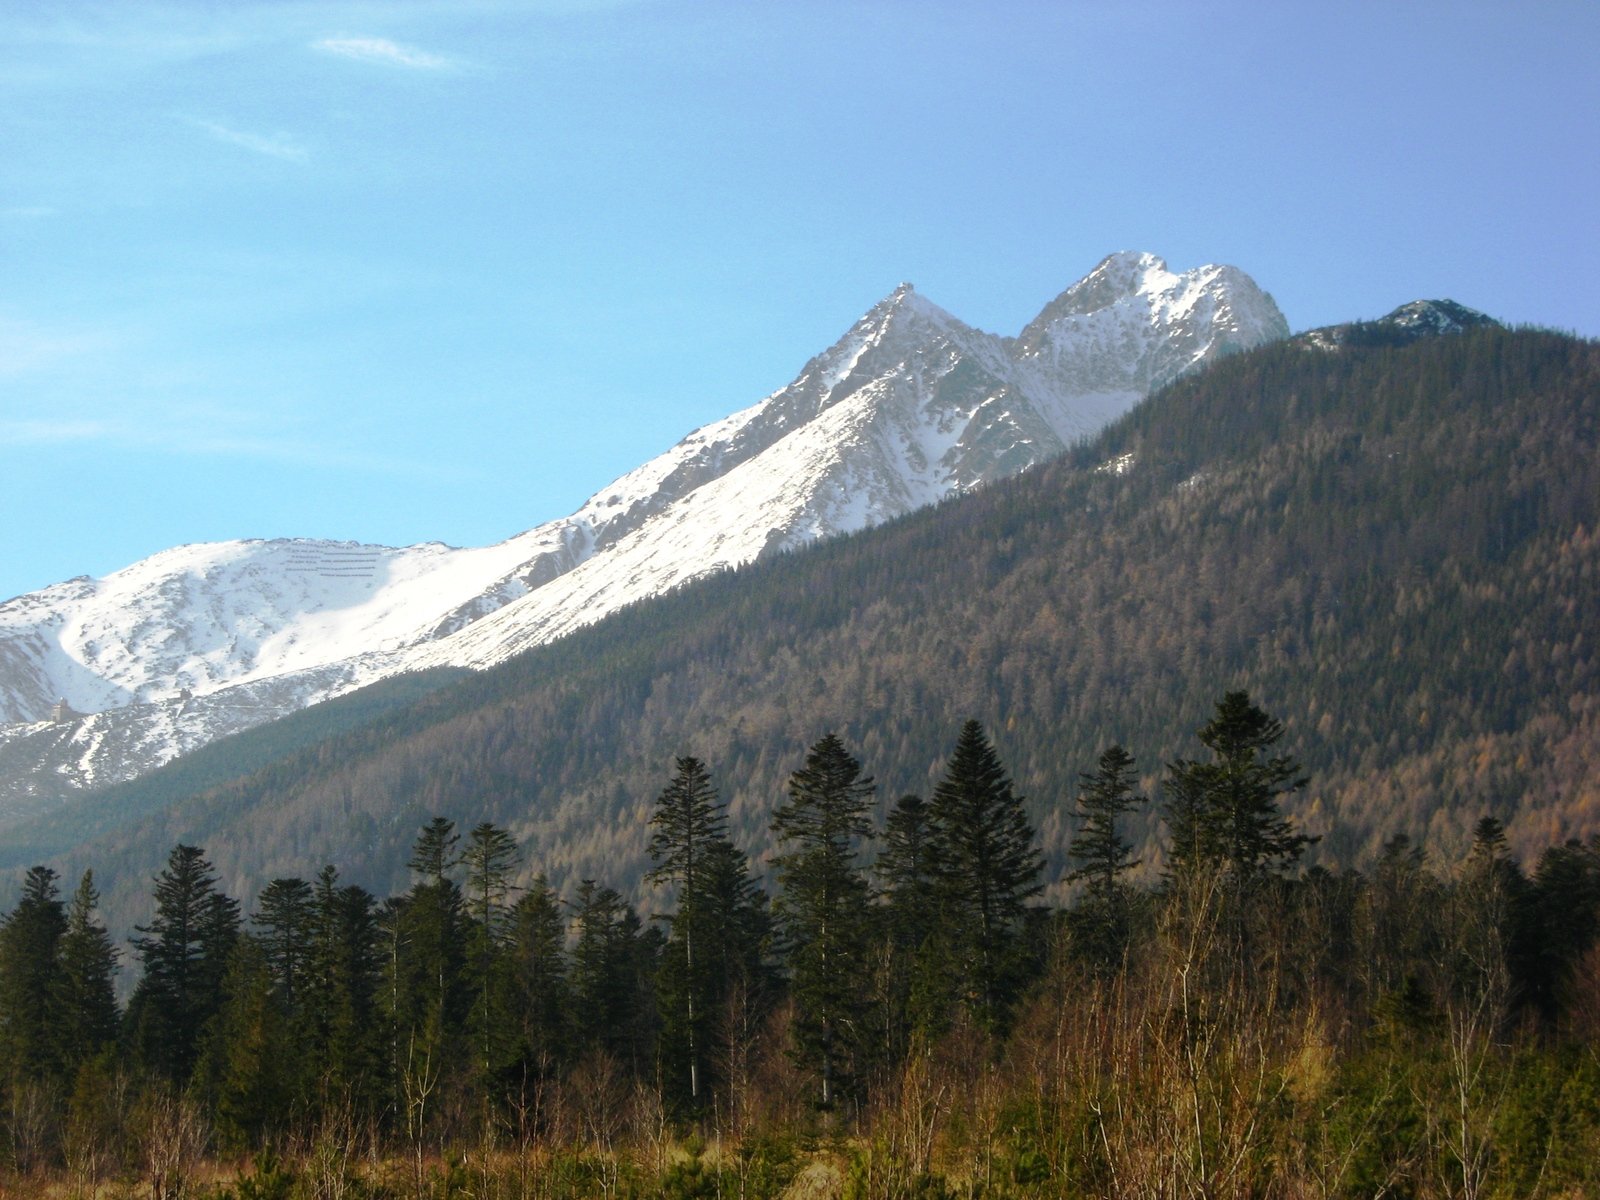 mountain side with snow capped peaks and trees